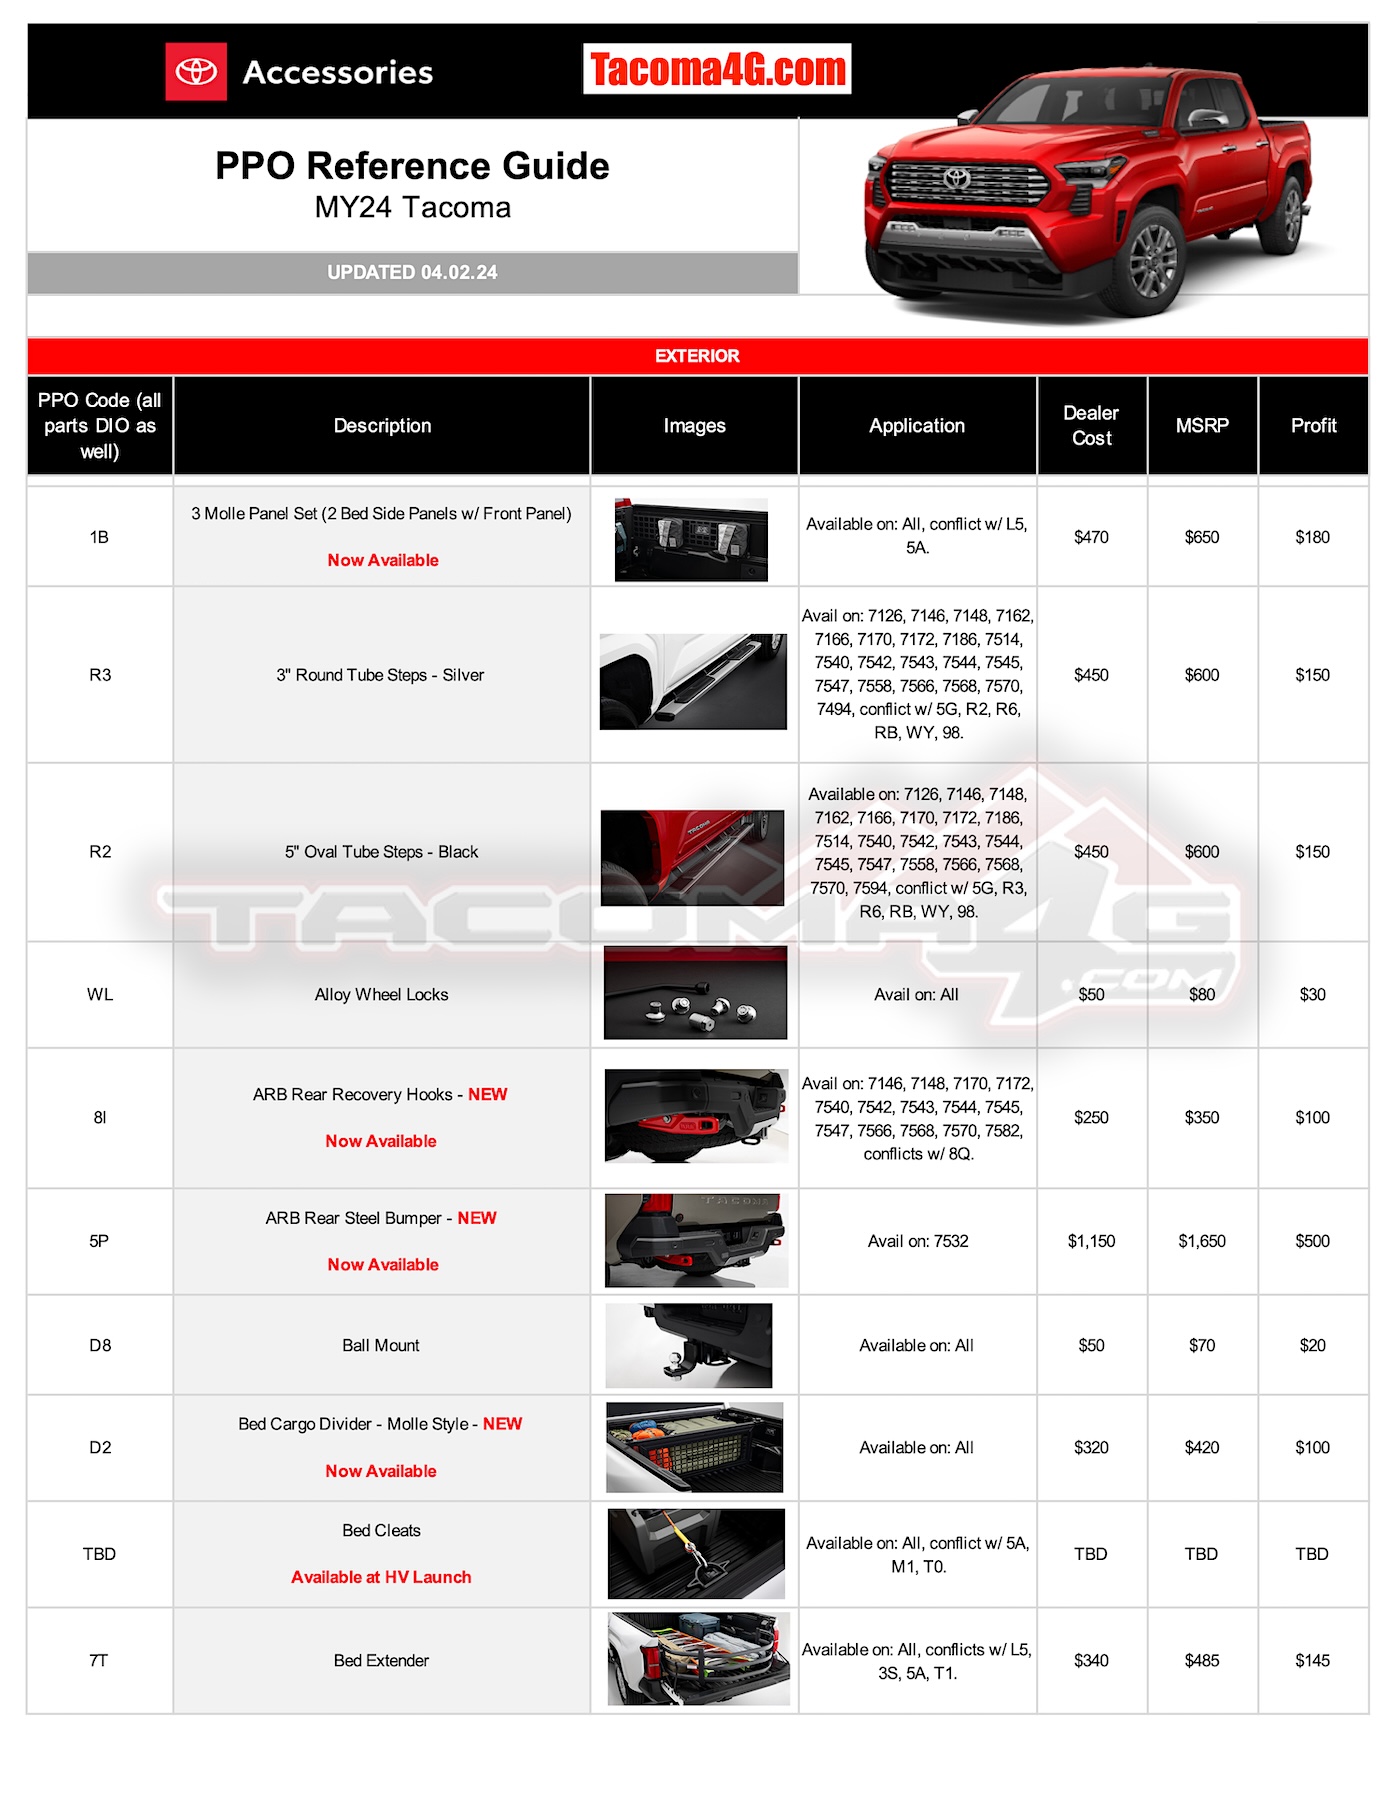 2024 Tacoma 2024 Tacoma Post-Production Options (PPO) Guide - OEM / TRD Accessories Parts + Pricing!  [UPDATED 4-24-24] MY24 Tacoma PPO Guide_04_02_24-1